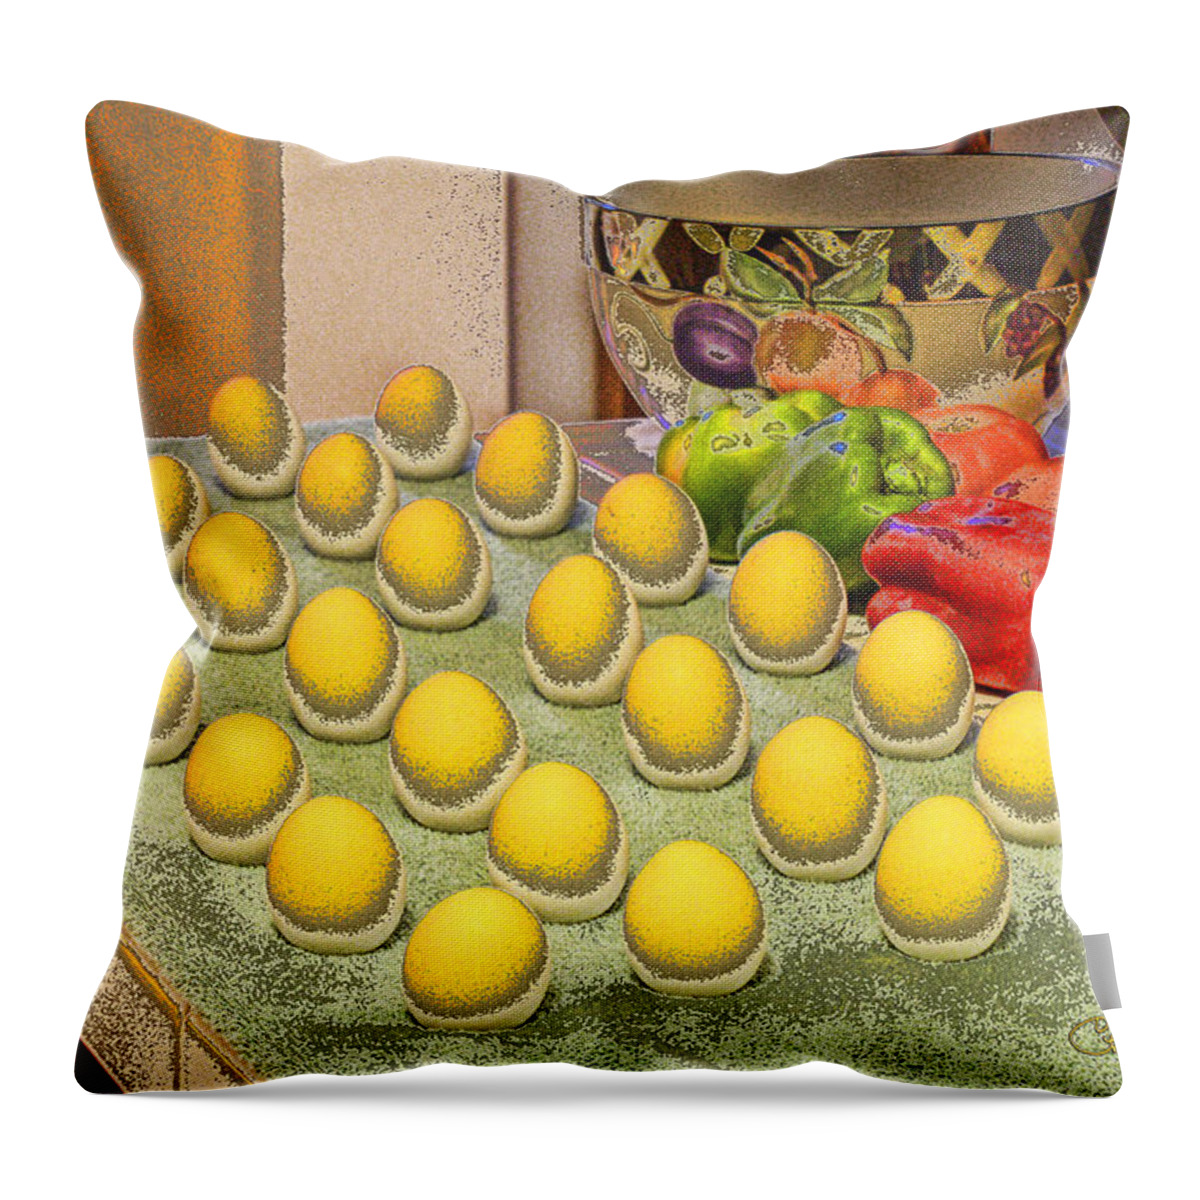 Sunny Side Up Throw Pillow featuring the photograph Sunny Side Up by Chuck Staley